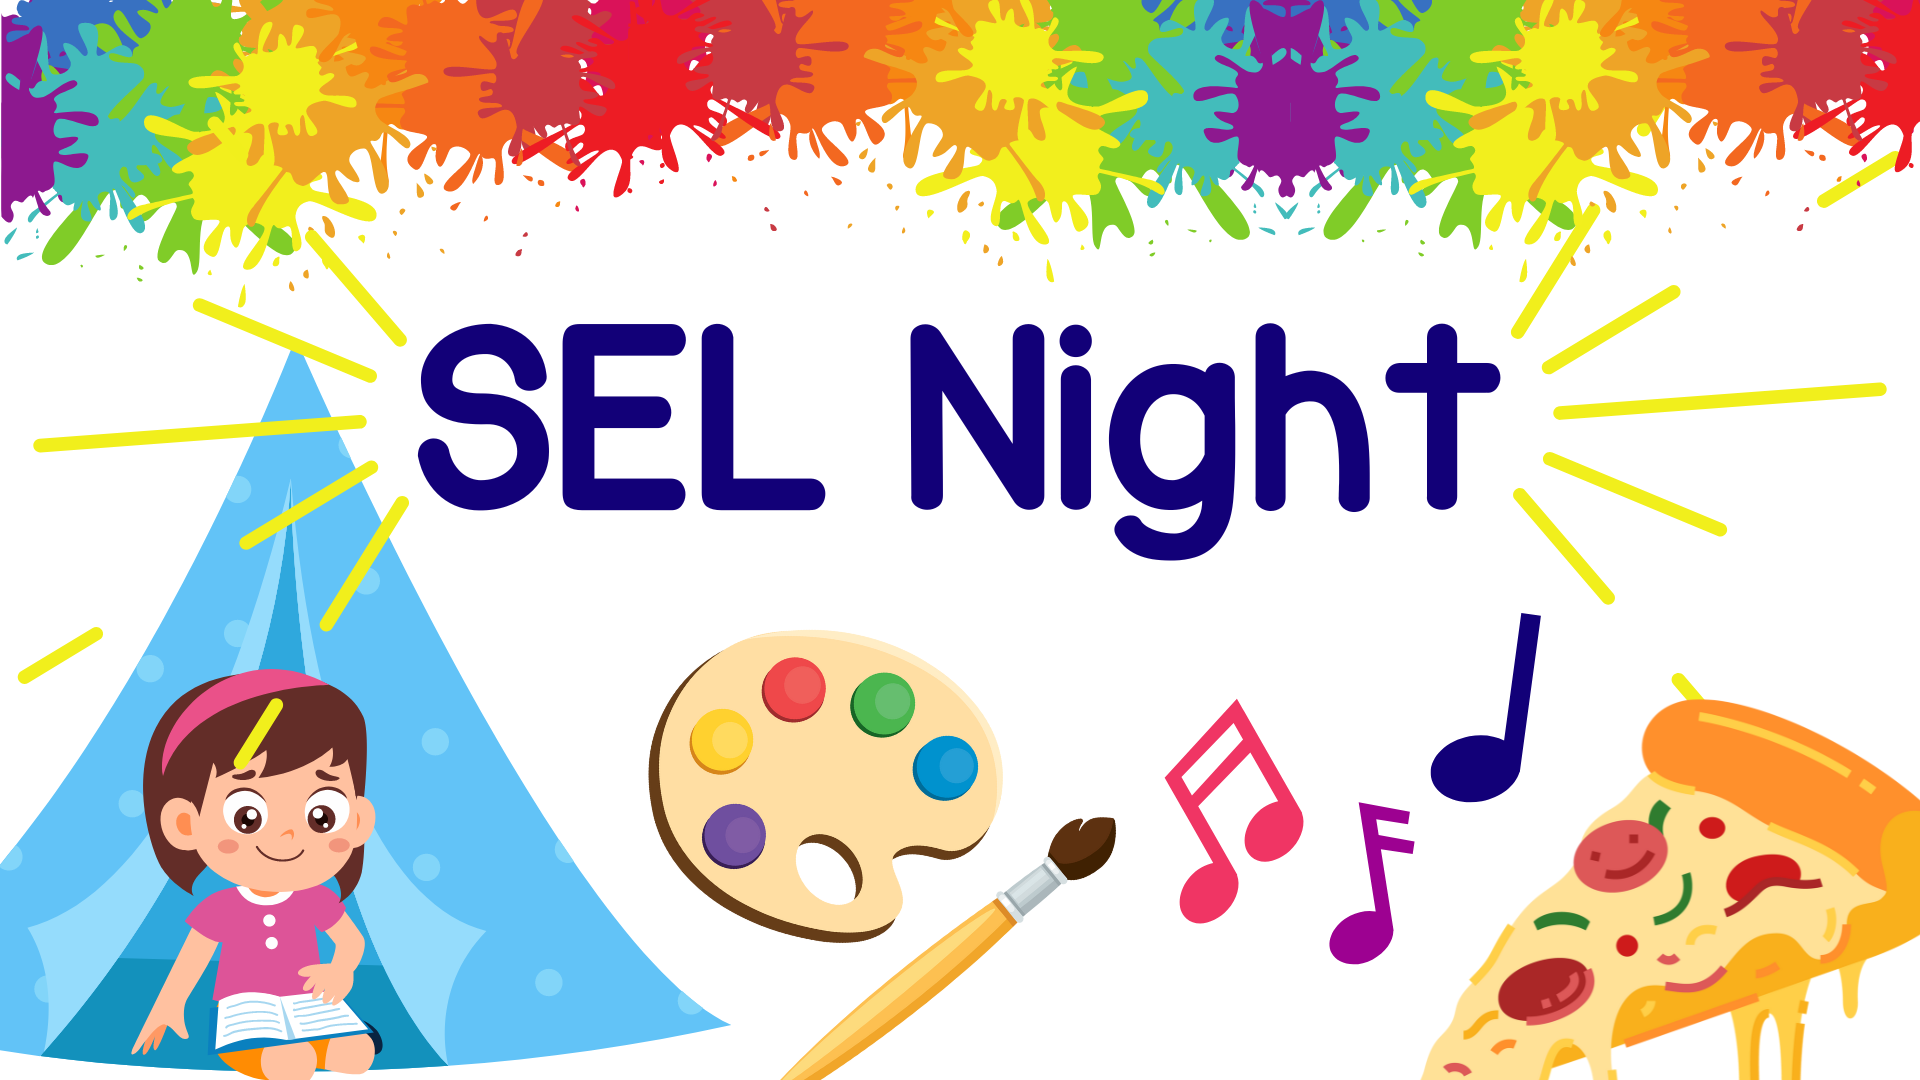 title card says SEL Night and has pictures of art supplies, music notes and a child reading in a tent